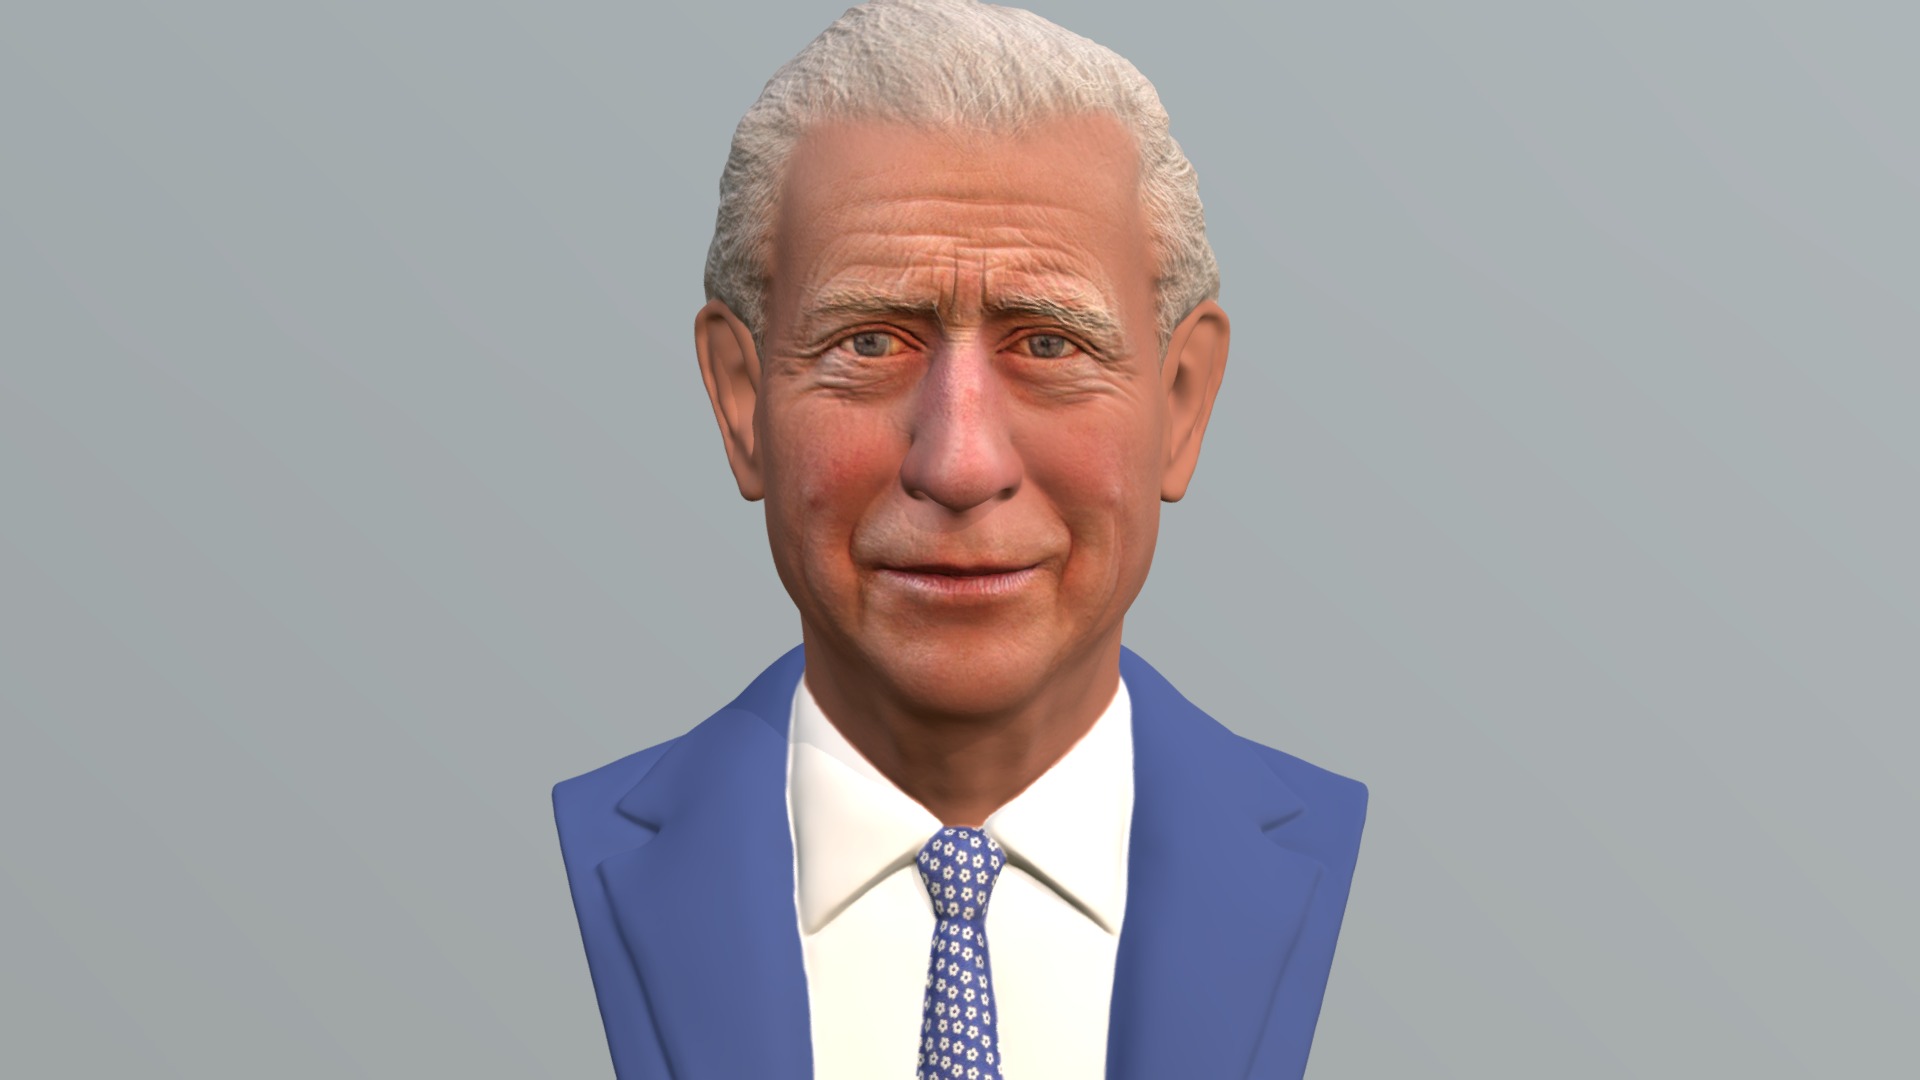 3D model Prince Charles bust for full color 3D printing - This is a 3D model of the Prince Charles bust for full color 3D printing. The 3D model is about a man in a suit.